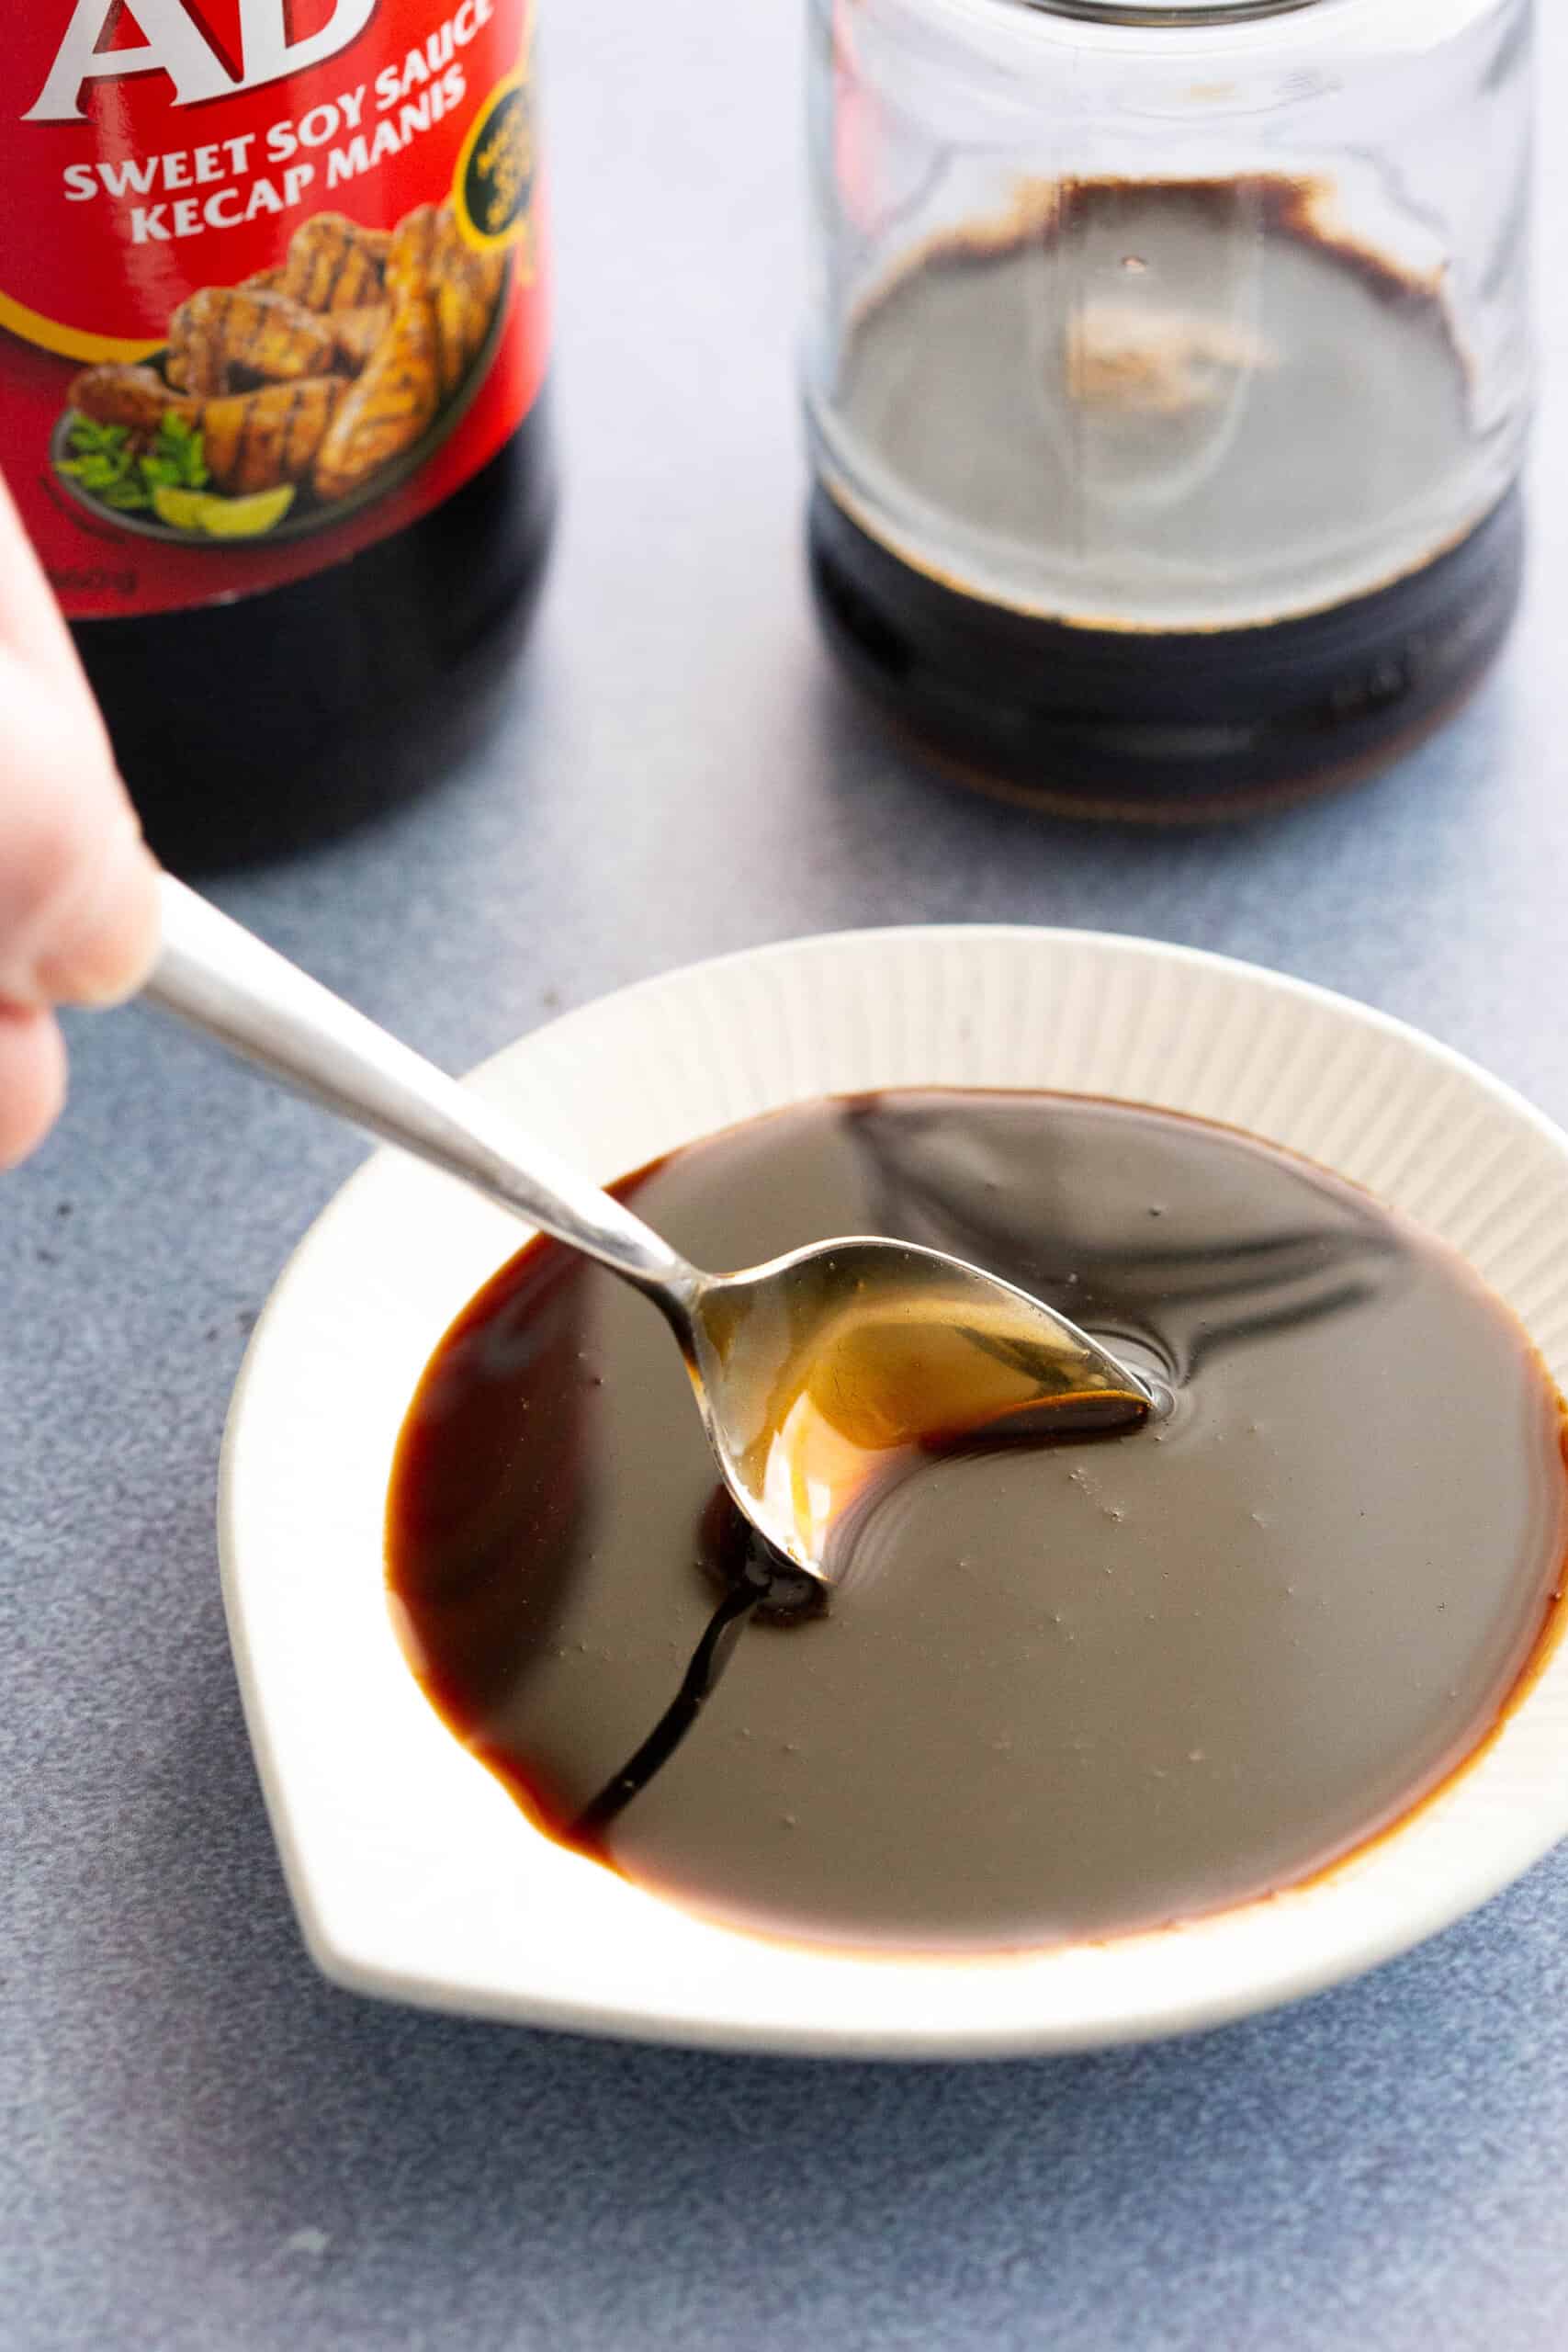 Dipping a spoon into homemade Indonesian sweet soy sauce.